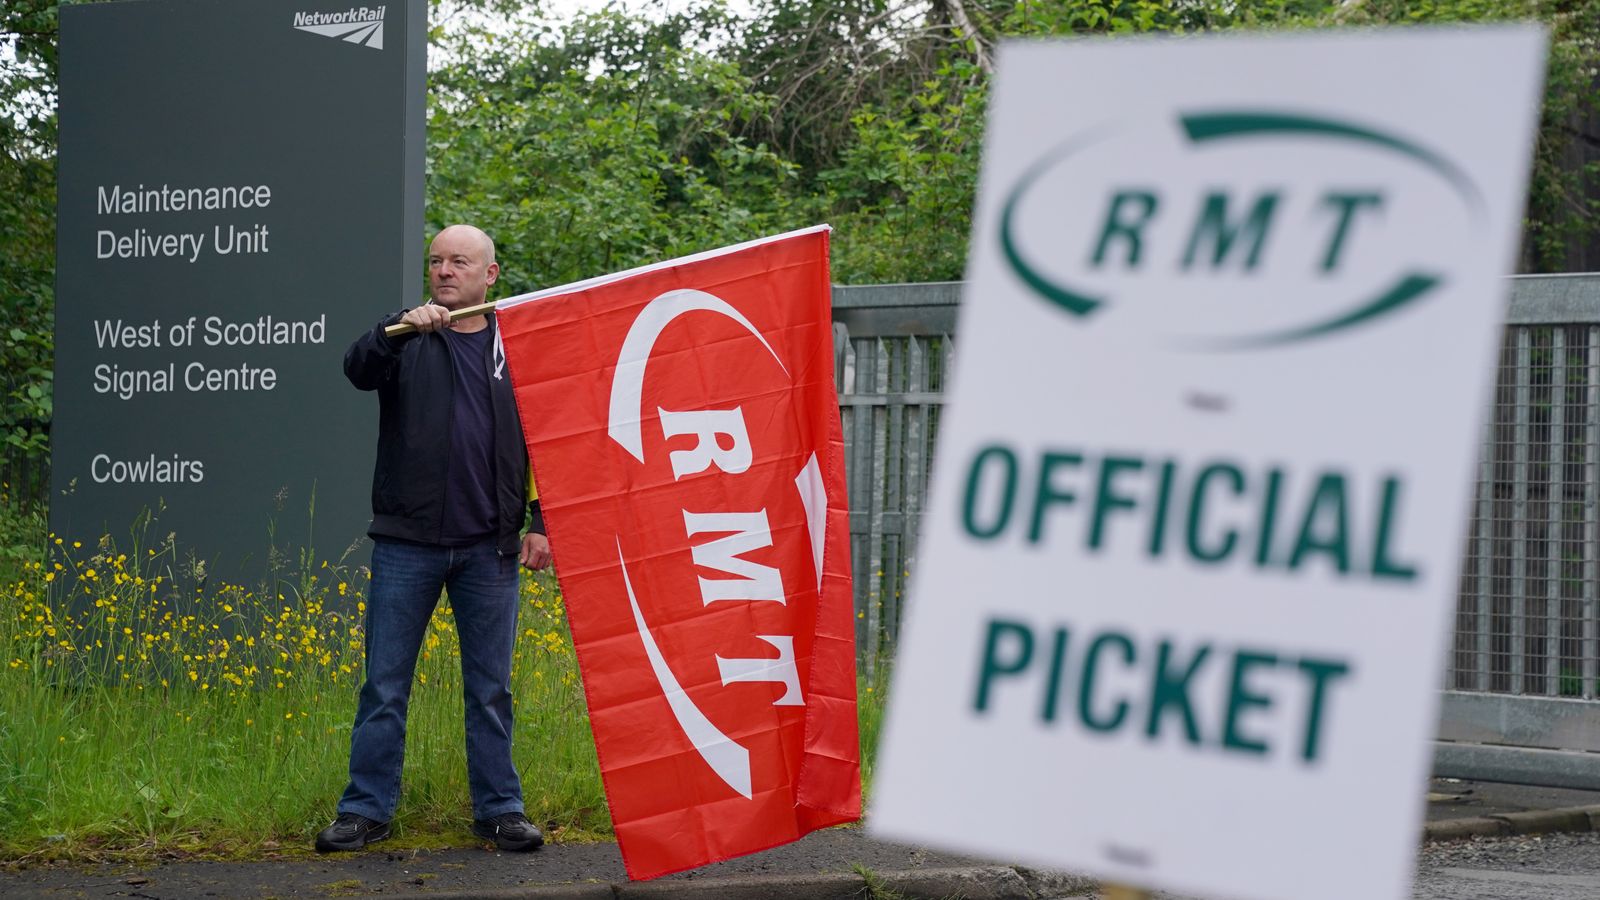 More rail strikes to take place in November after pay offer 'U-turn', RMT says